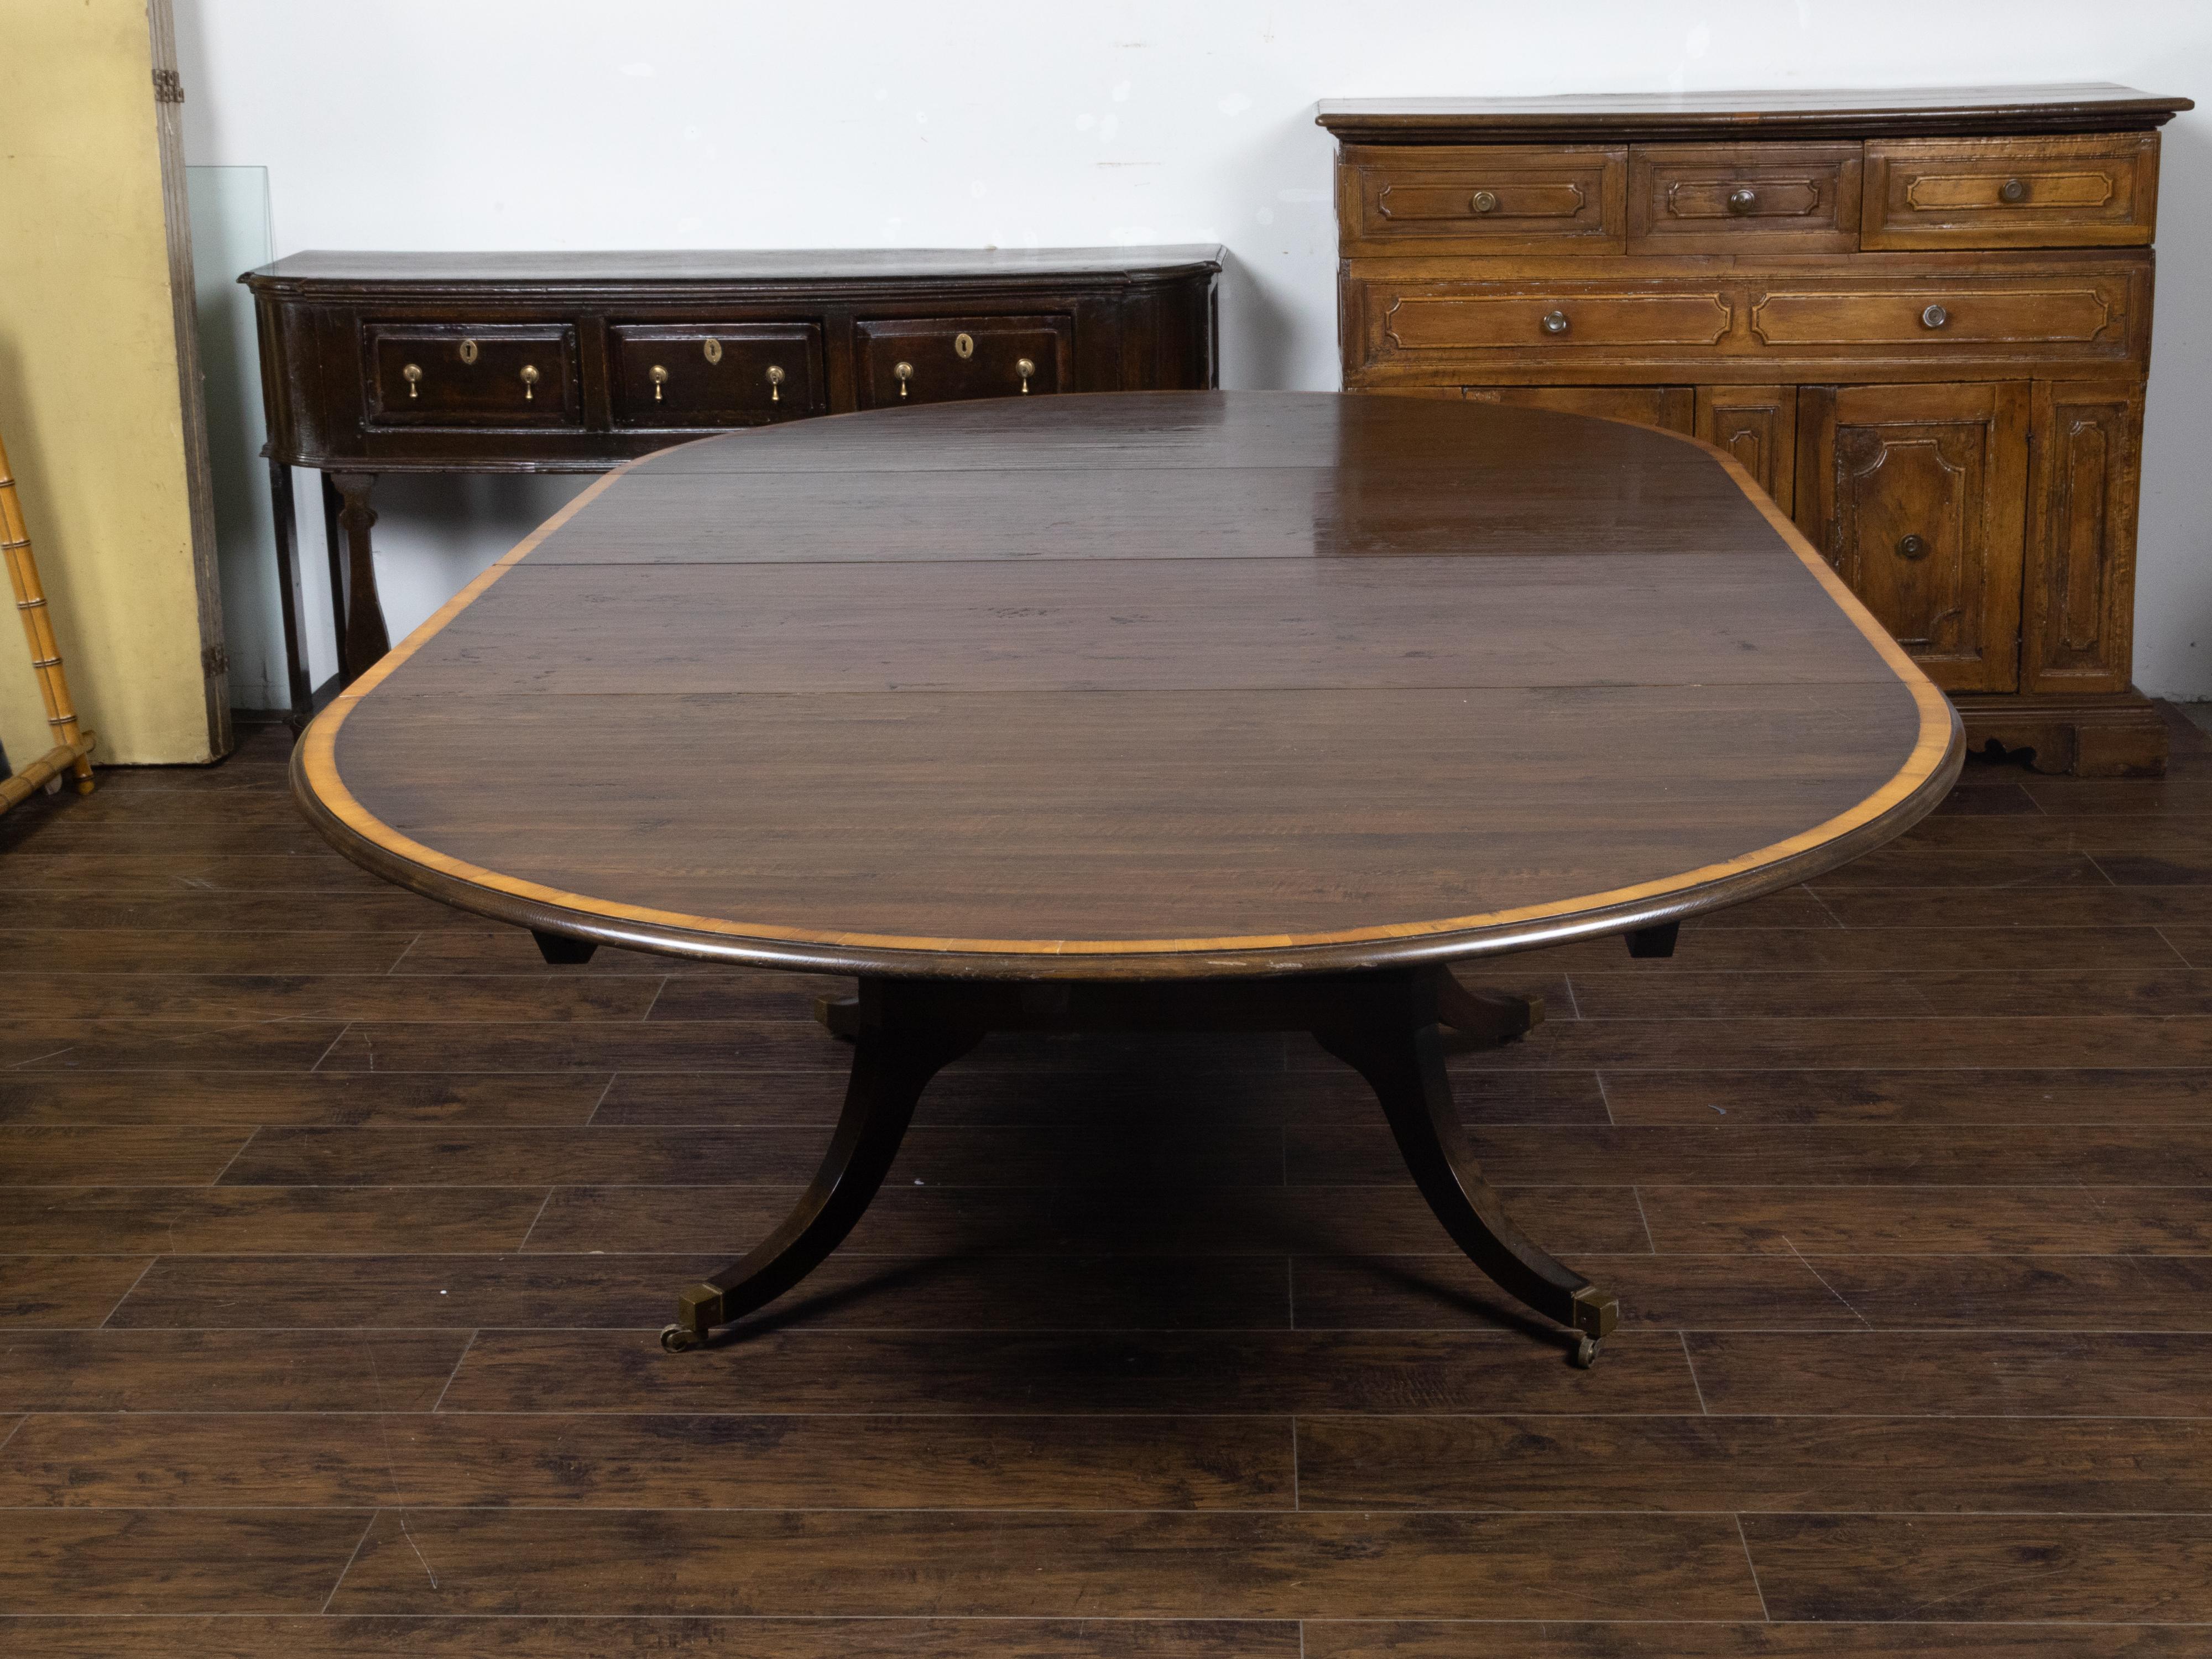 Vintage English Oak Extension Table with Two Leaves and Four Legs on Casters For Sale 2